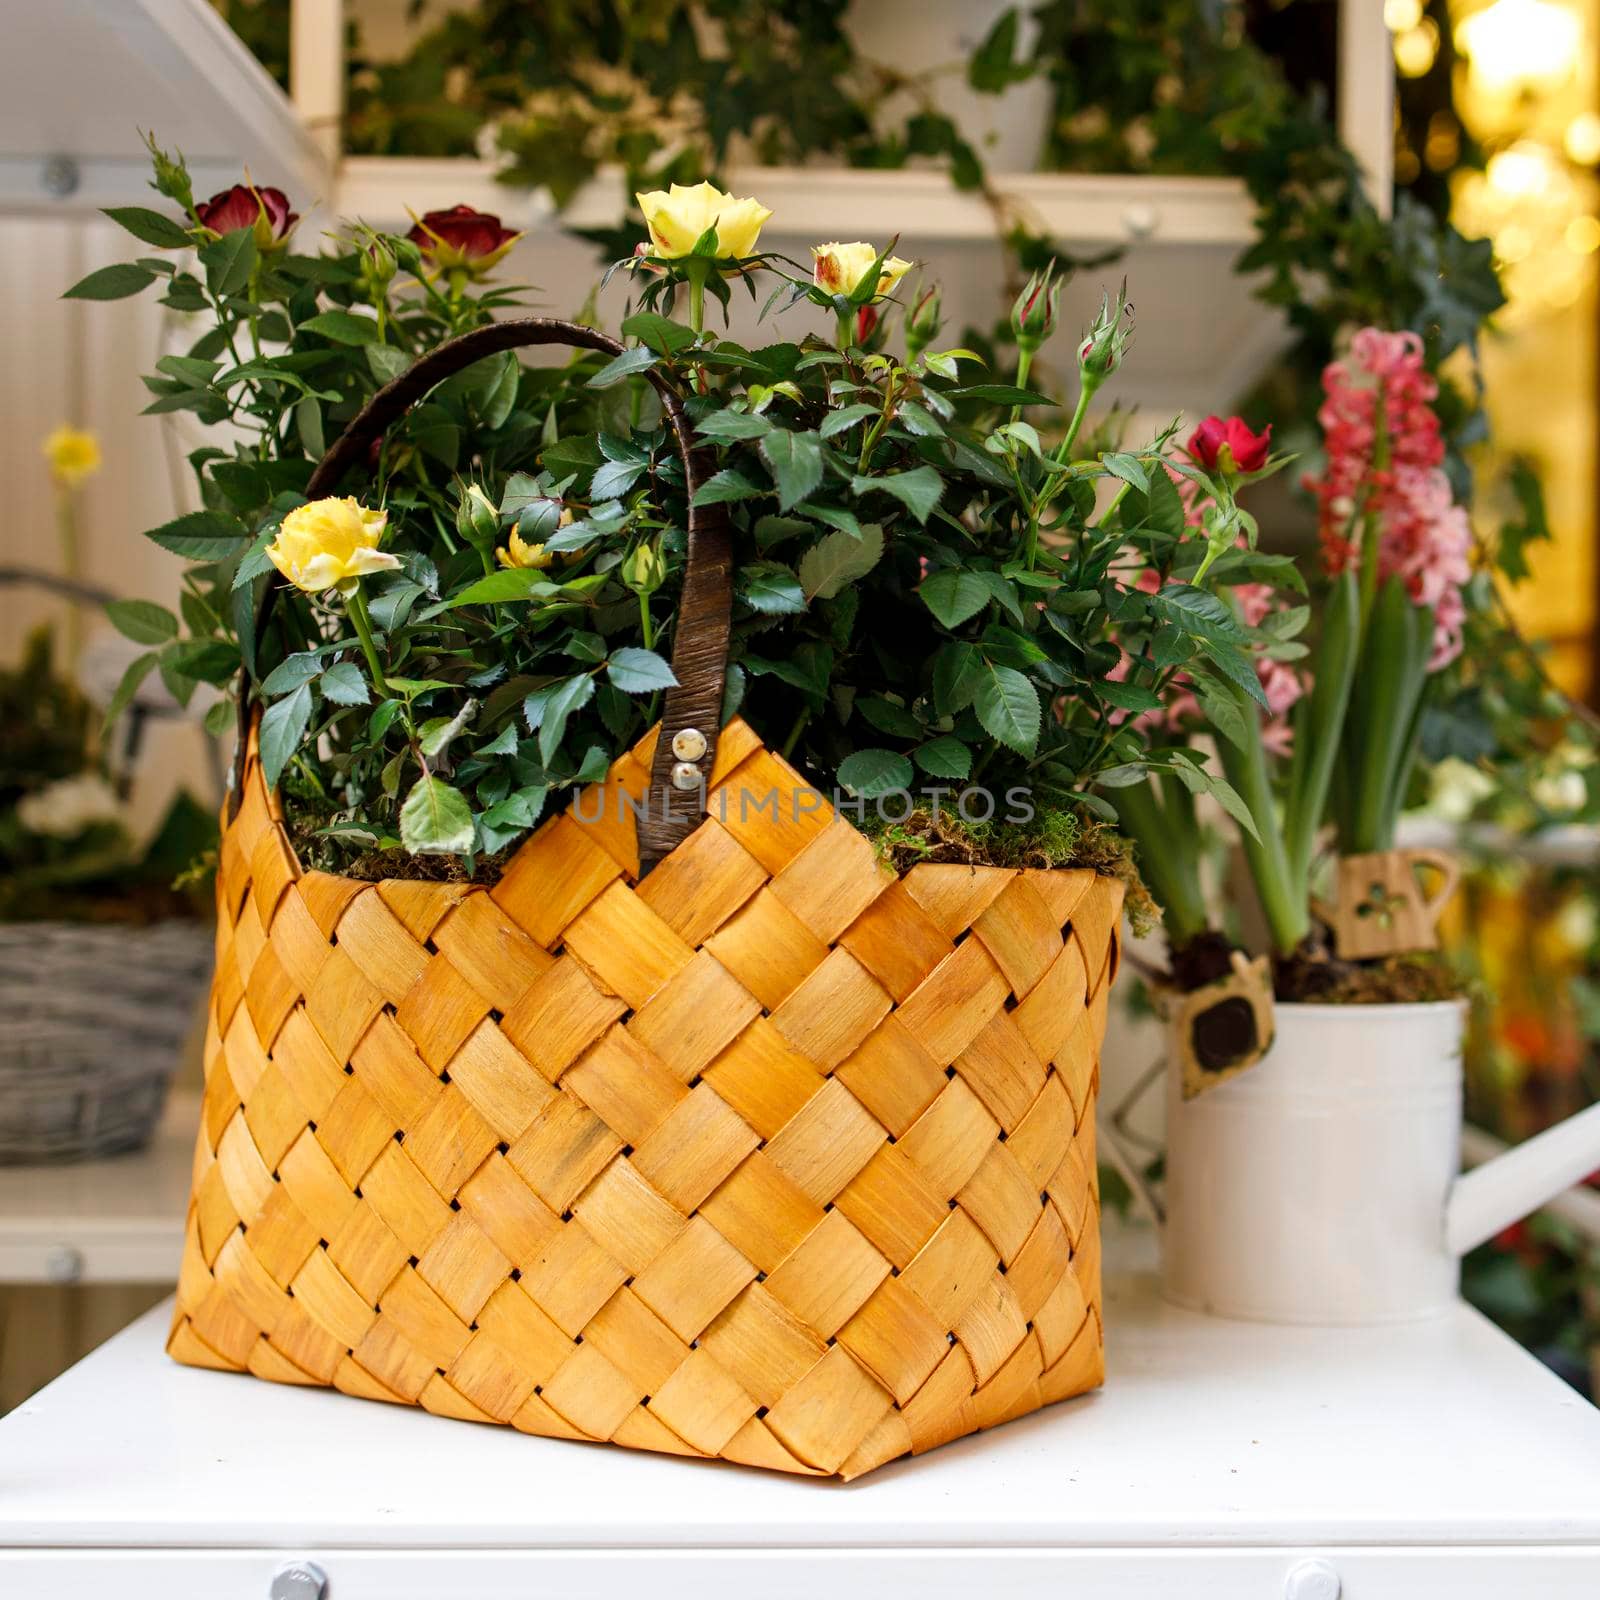 pink and yellow rose bushes in a woven birch bark bag for sale in a flower shop by elenarostunova